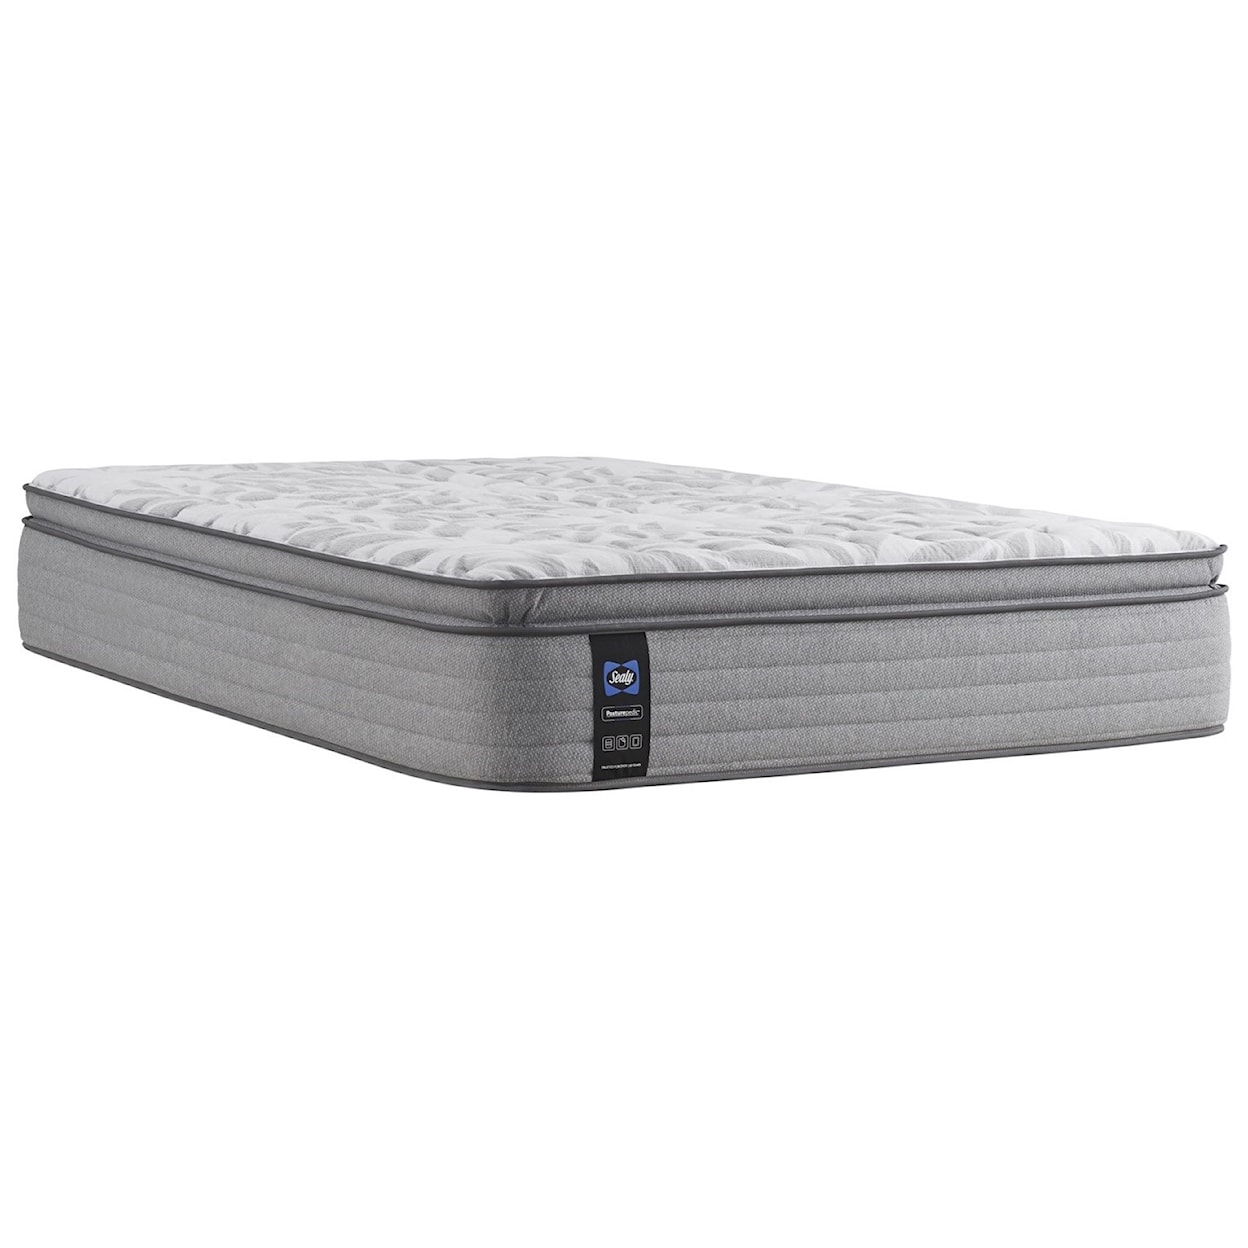 Sealy PPS4 Posturpedic Innerspring Soft EPT Twin XL 13 1/2" Soft EPT Mattress